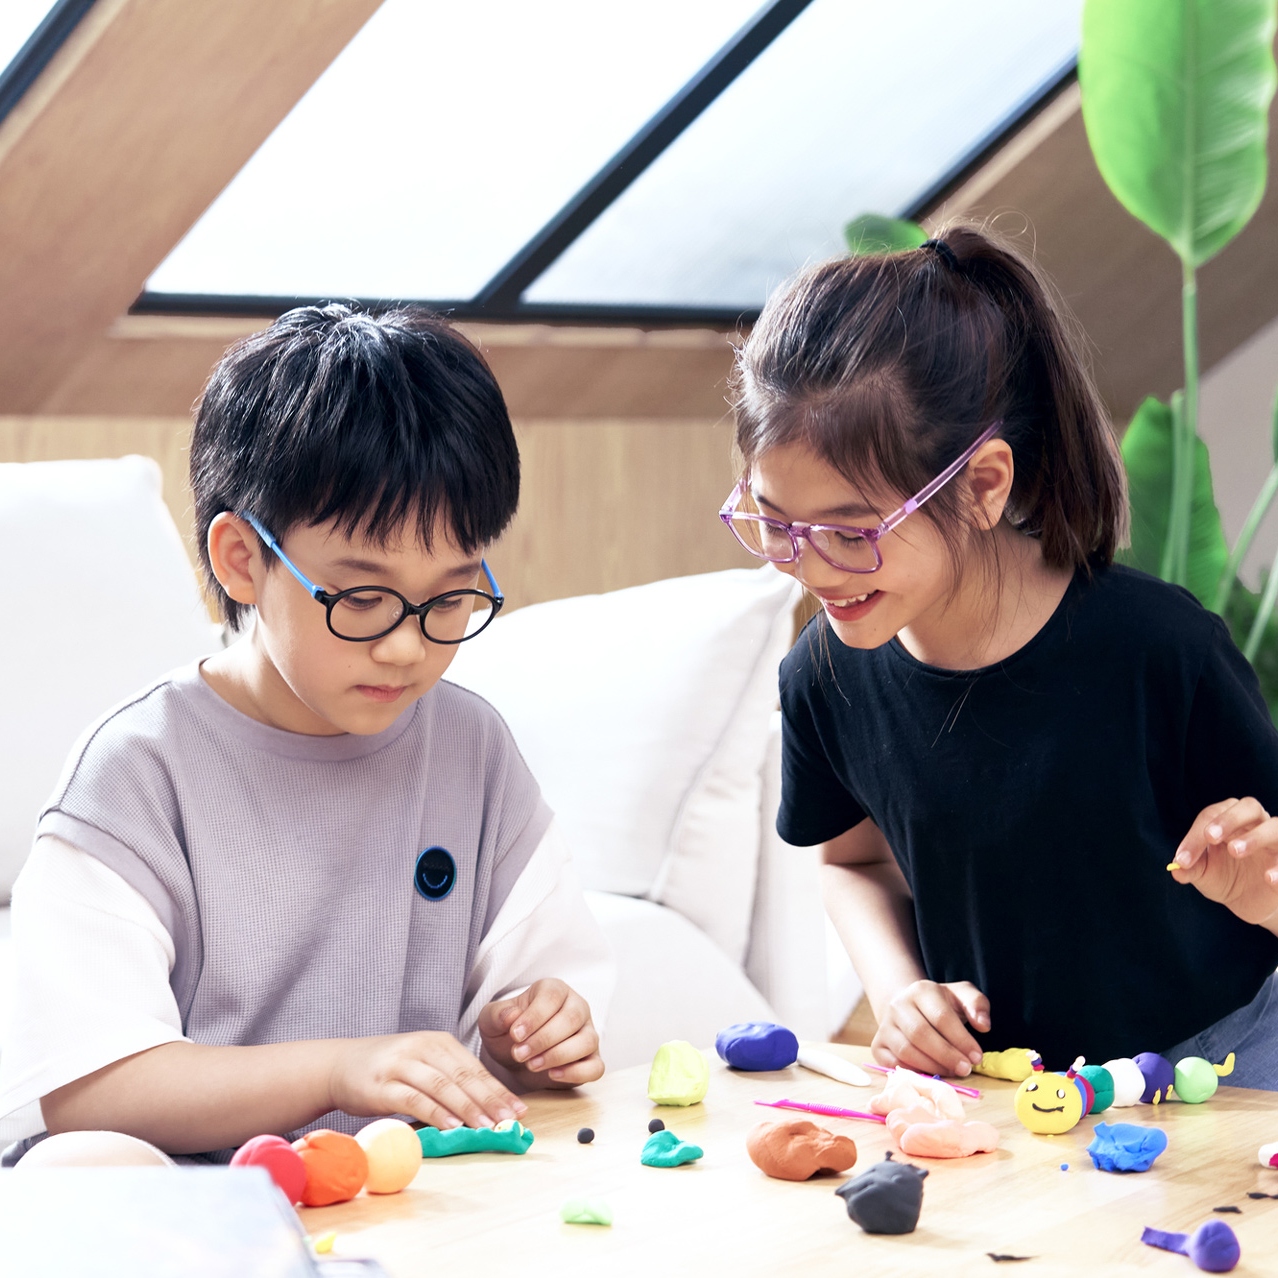 Two children wearing ZEISS Myopia Management lenses playing with modeling clay on a table.